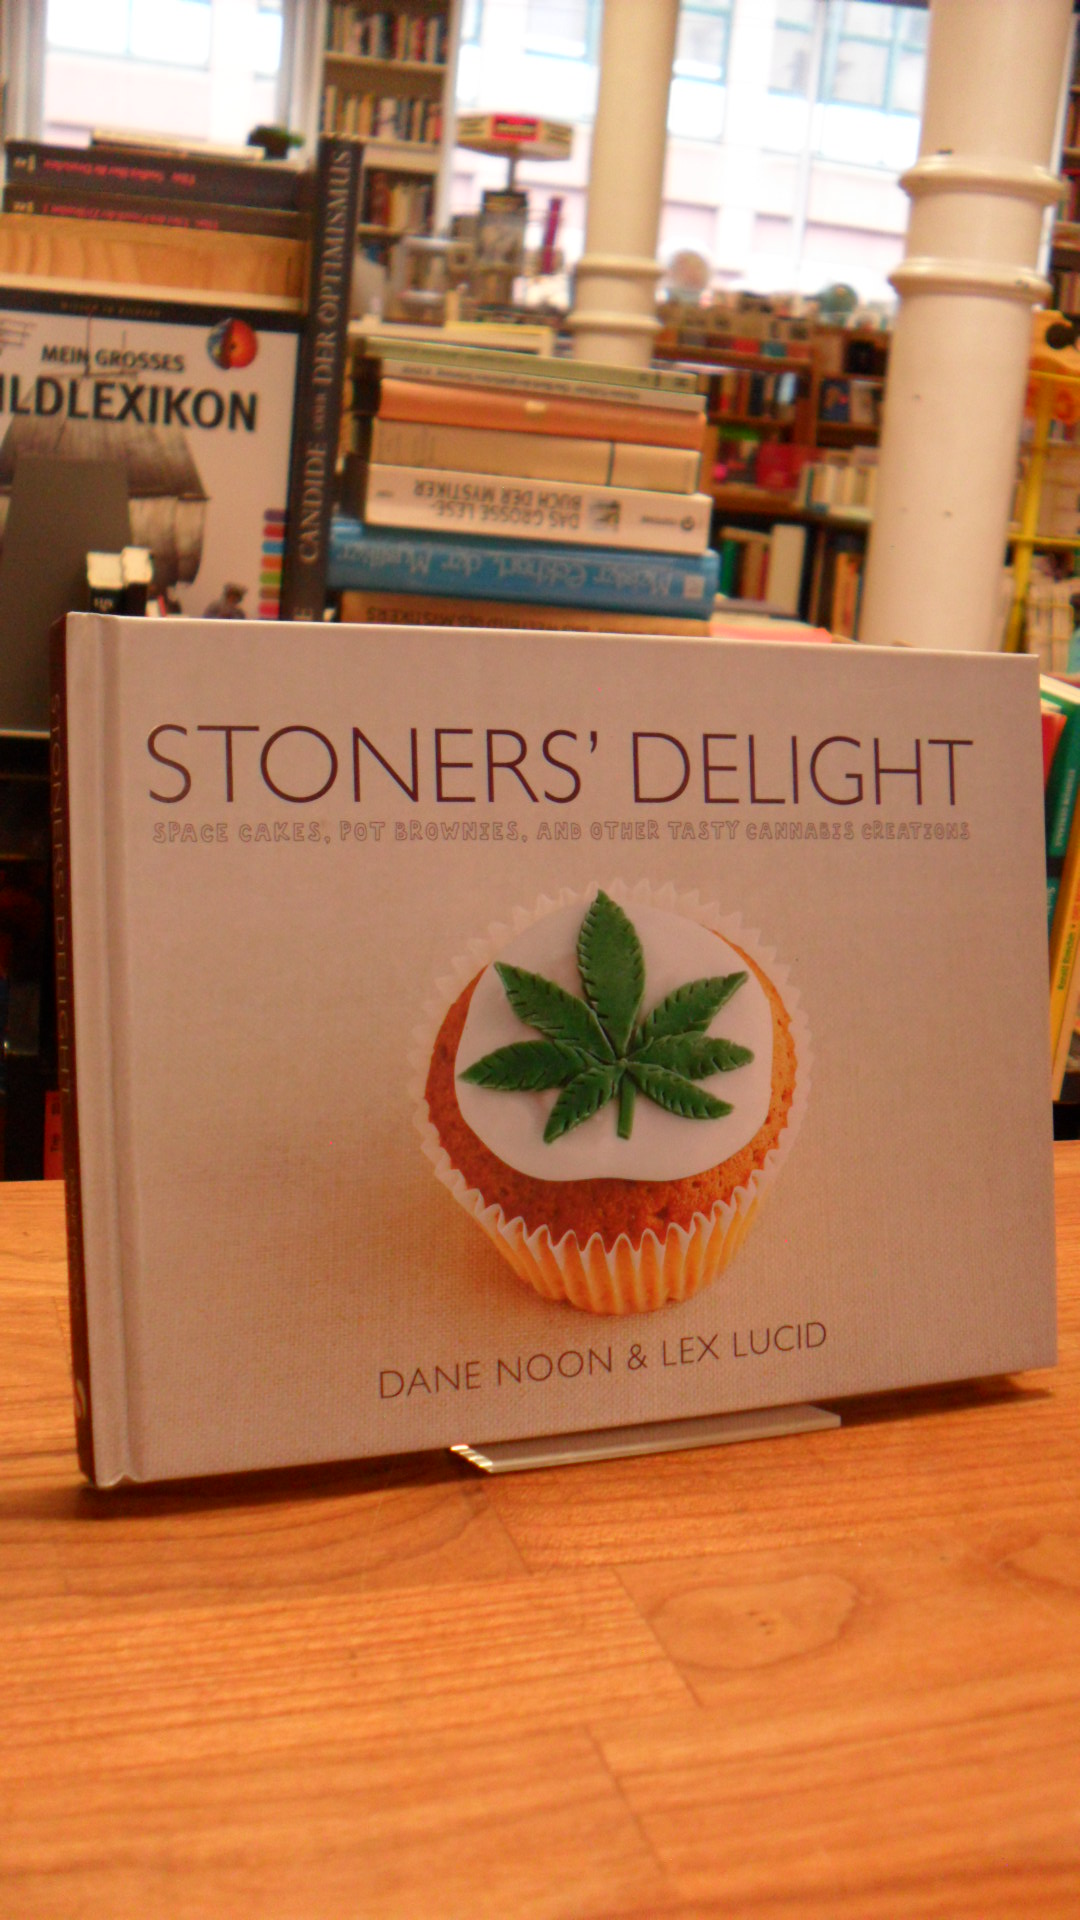 Noon, Stoners’ Delight – Space Cakes, Pot Brownies, and Other Tasty Cannabis Cre